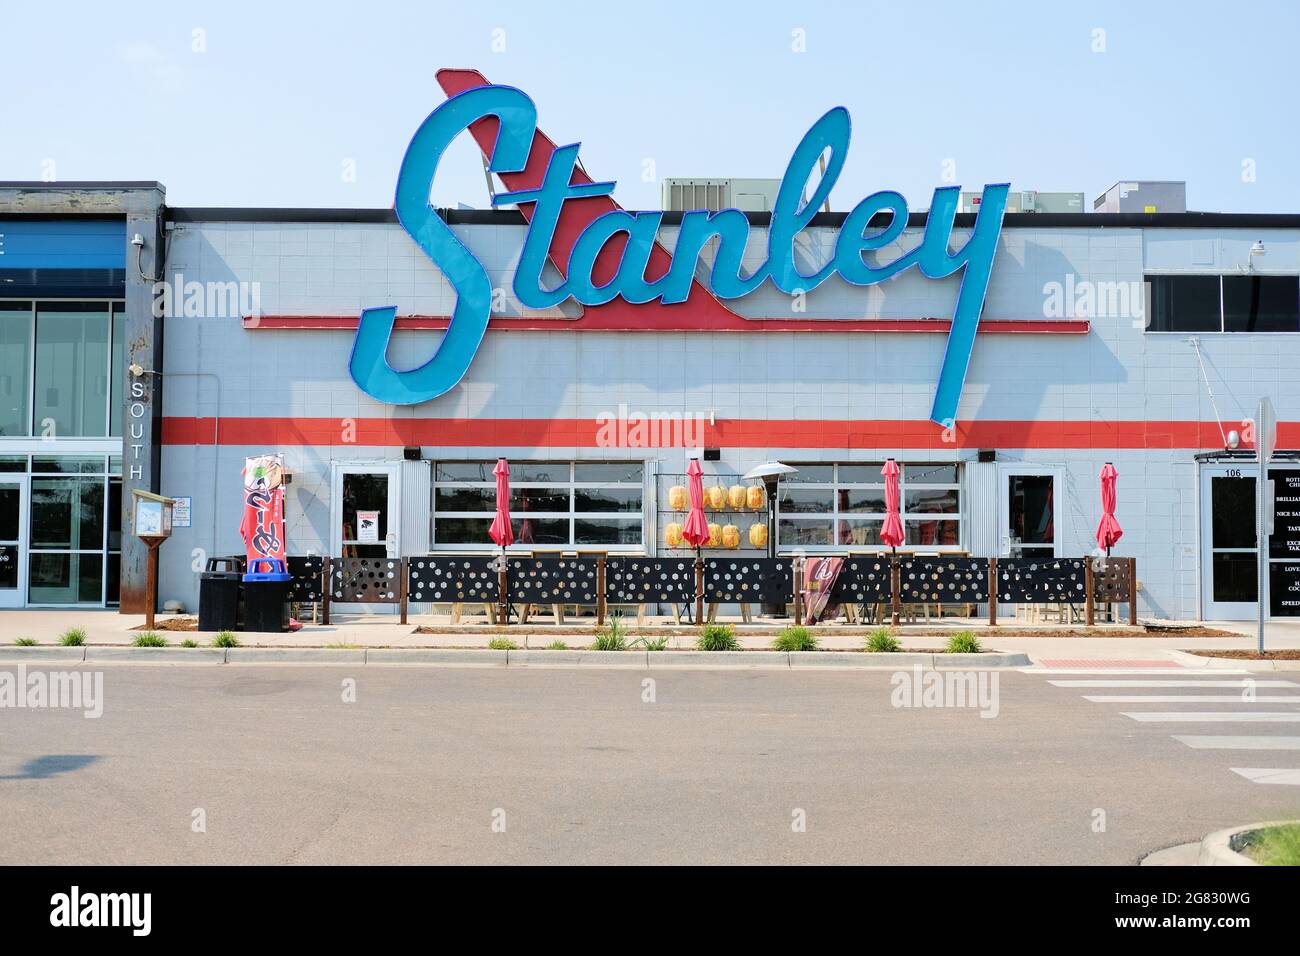 https://c8.alamy.com/comp/2G830WG/stanley-marketplace-in-aurora-colorado-former-home-of-stanley-aviation-converted-into-a-dining-retail-entertainment-event-facility-near-denver-2G830WG.jpg